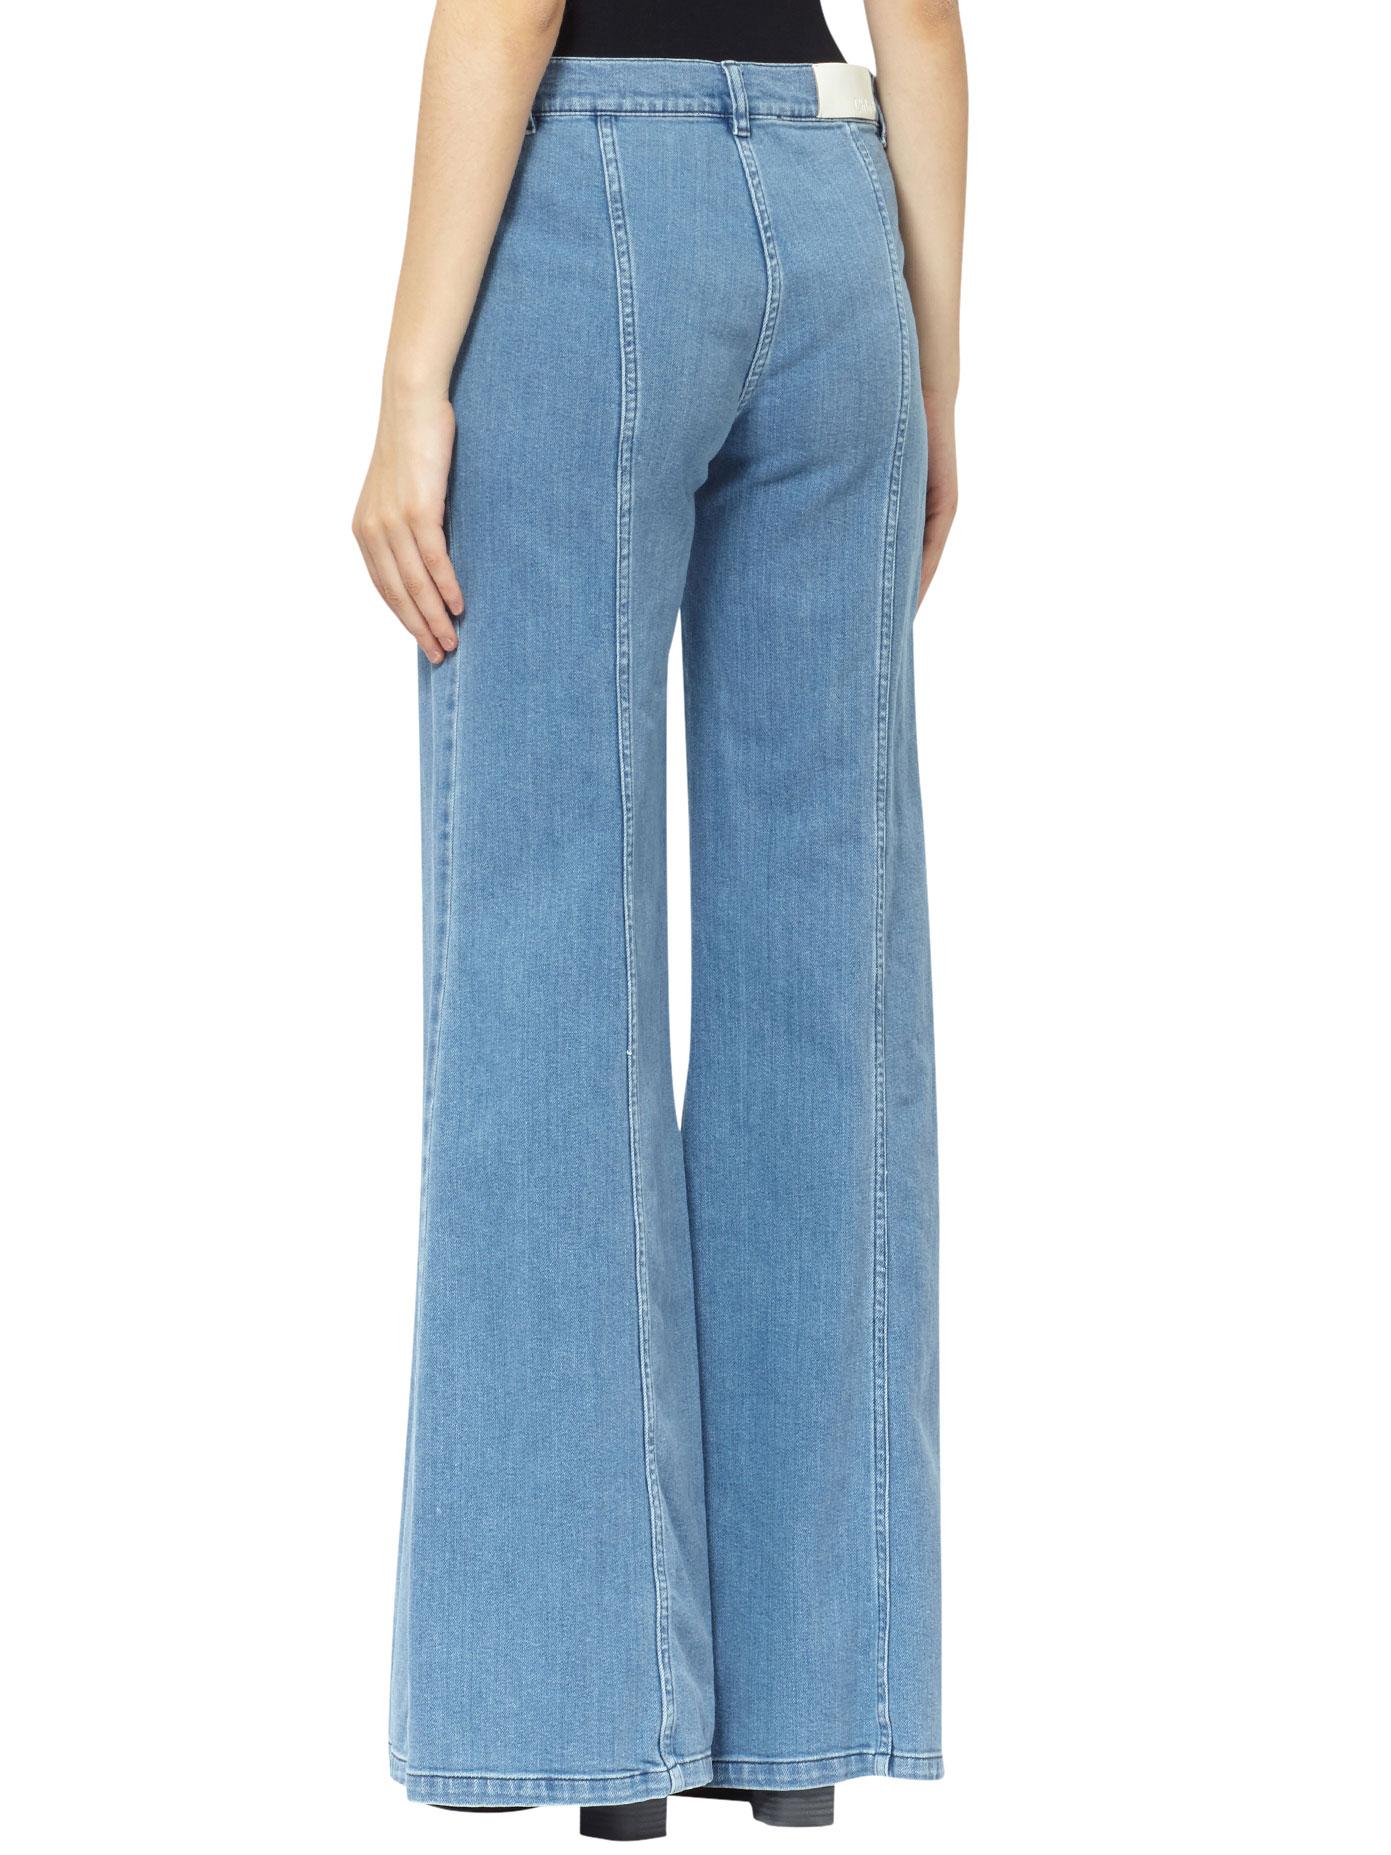 Lyst - Chloé Mid-rise Flared Jeans in Blue